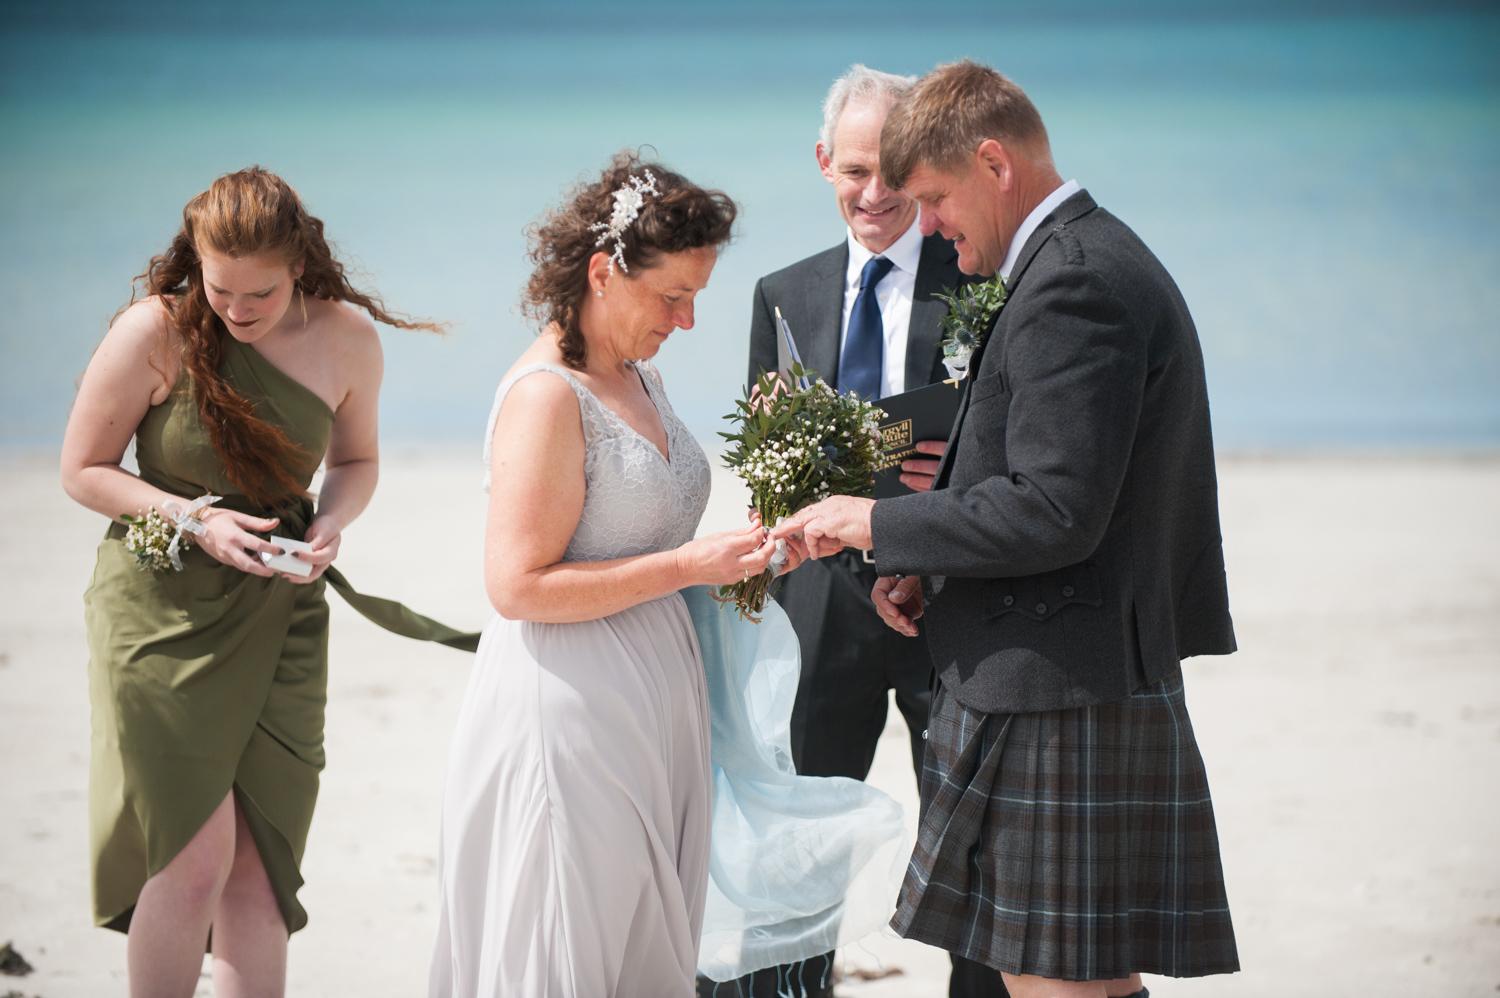 exchanging vows at Calgary bay beach wedding ceremony photograph